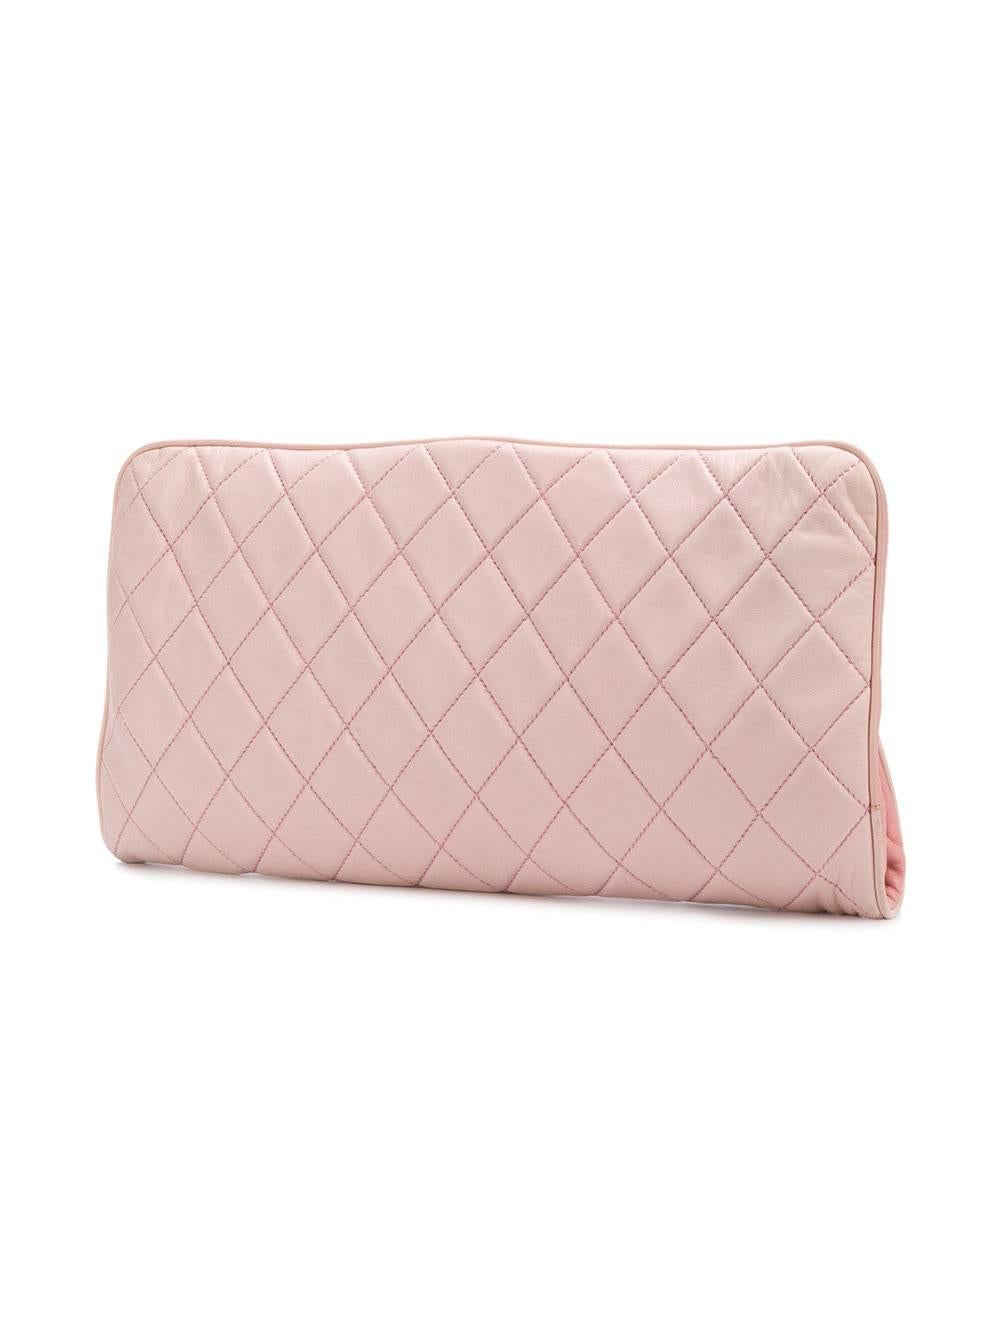 Pink lambskin quilted clutch bag from Chanel Vintage featuring a foldover top and a signature interlocking CC logo. 

Colour: Pink

Composition: Lambskin

Measurements: W: 35cm, H: 17cm, D: 4cm

Condition: 9/10